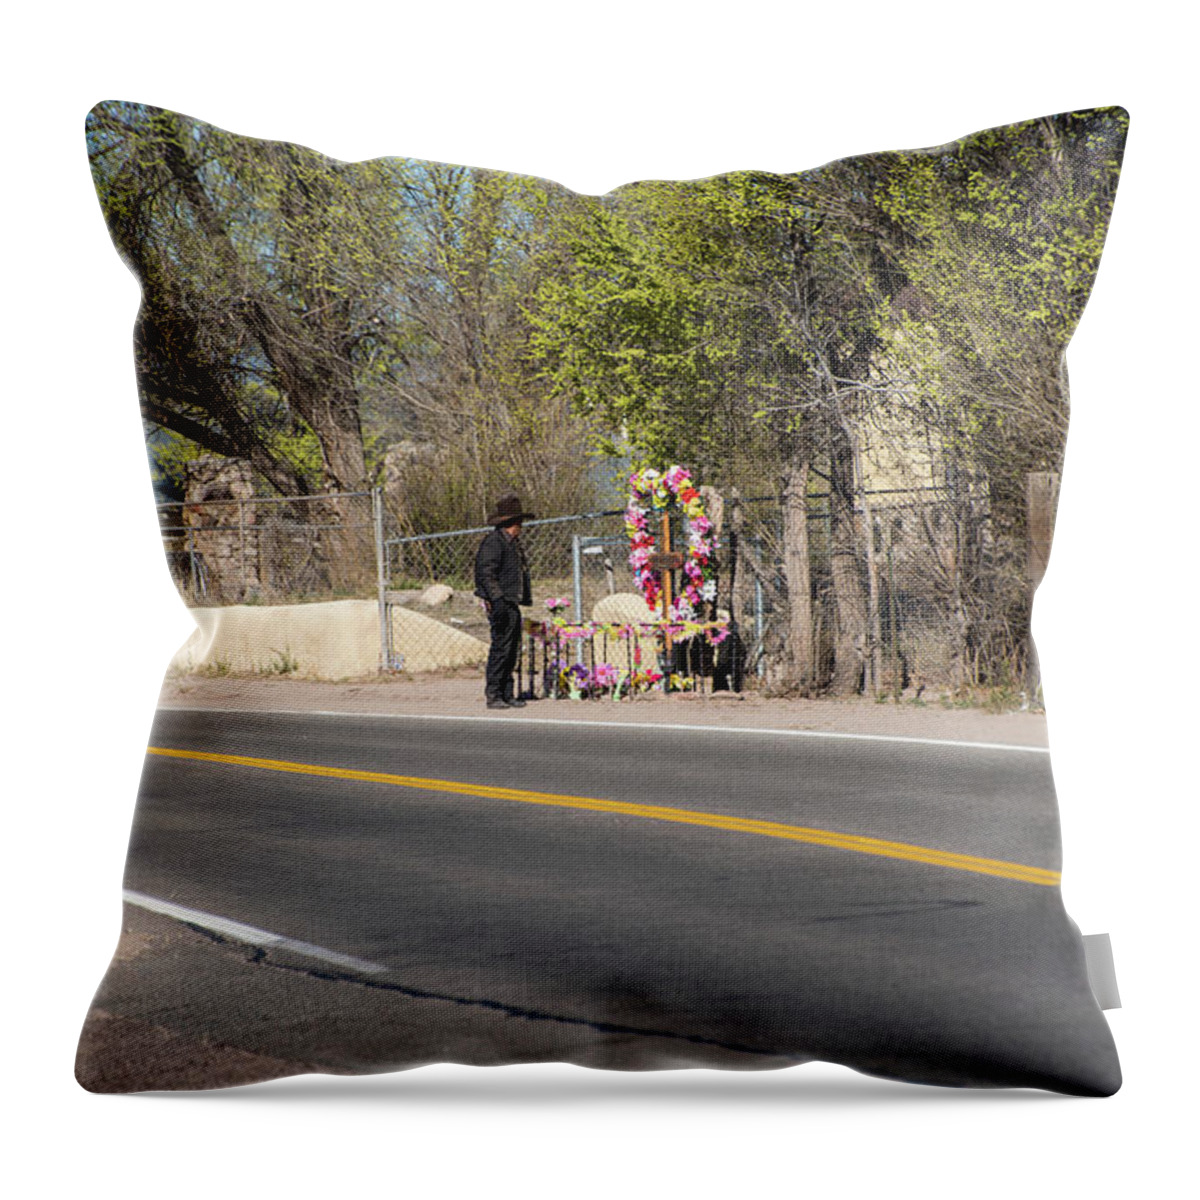 Pilgrim Throw Pillow featuring the photograph Sojourner by Tom Cochran